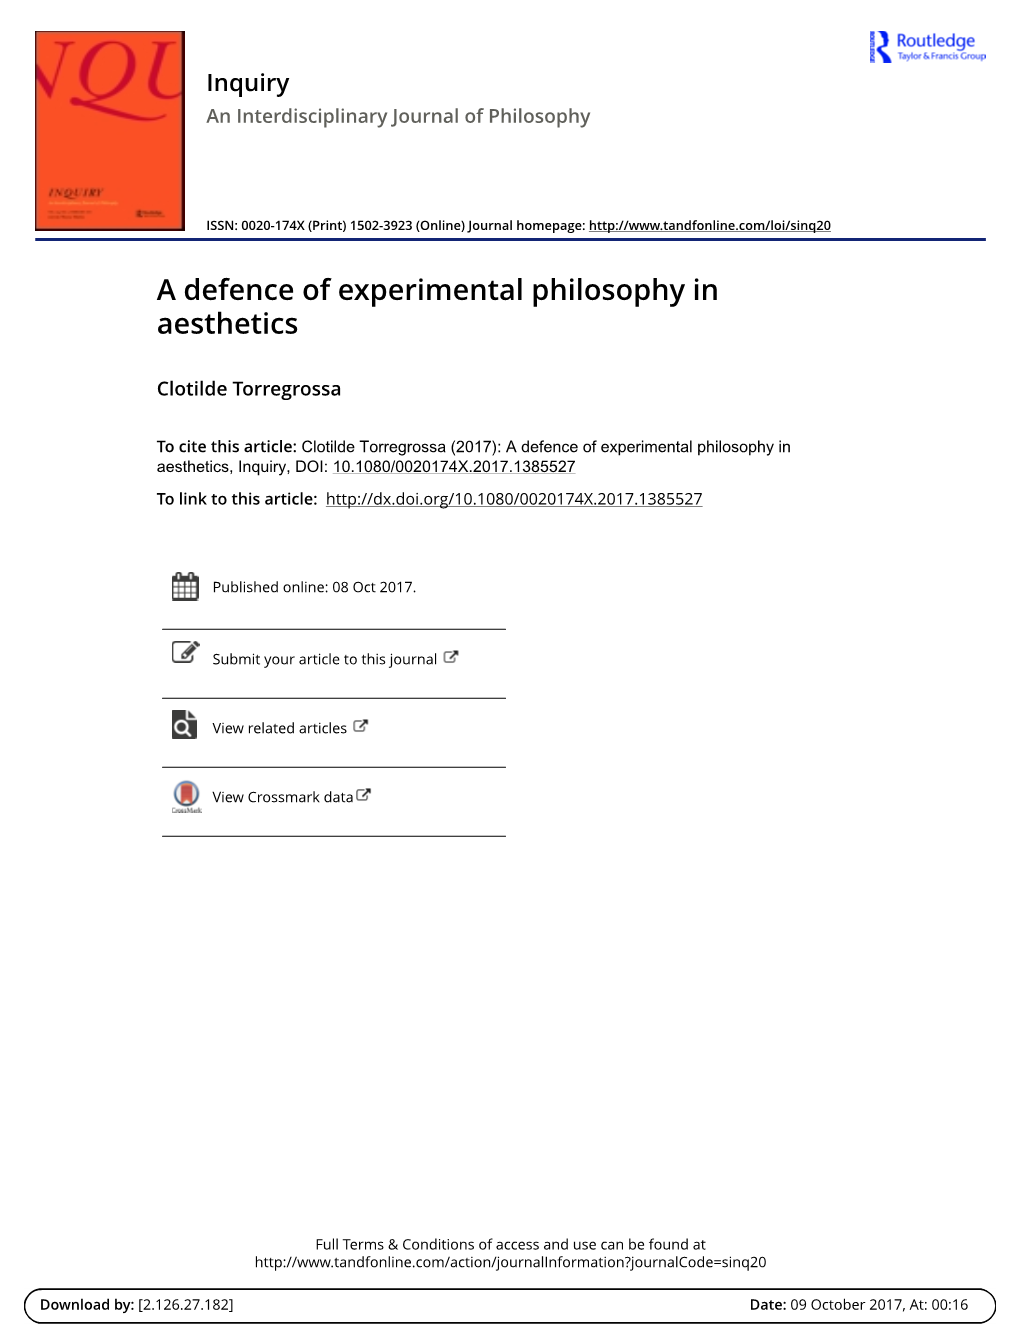 A Defence of Experimental Philosophy in Aesthetics